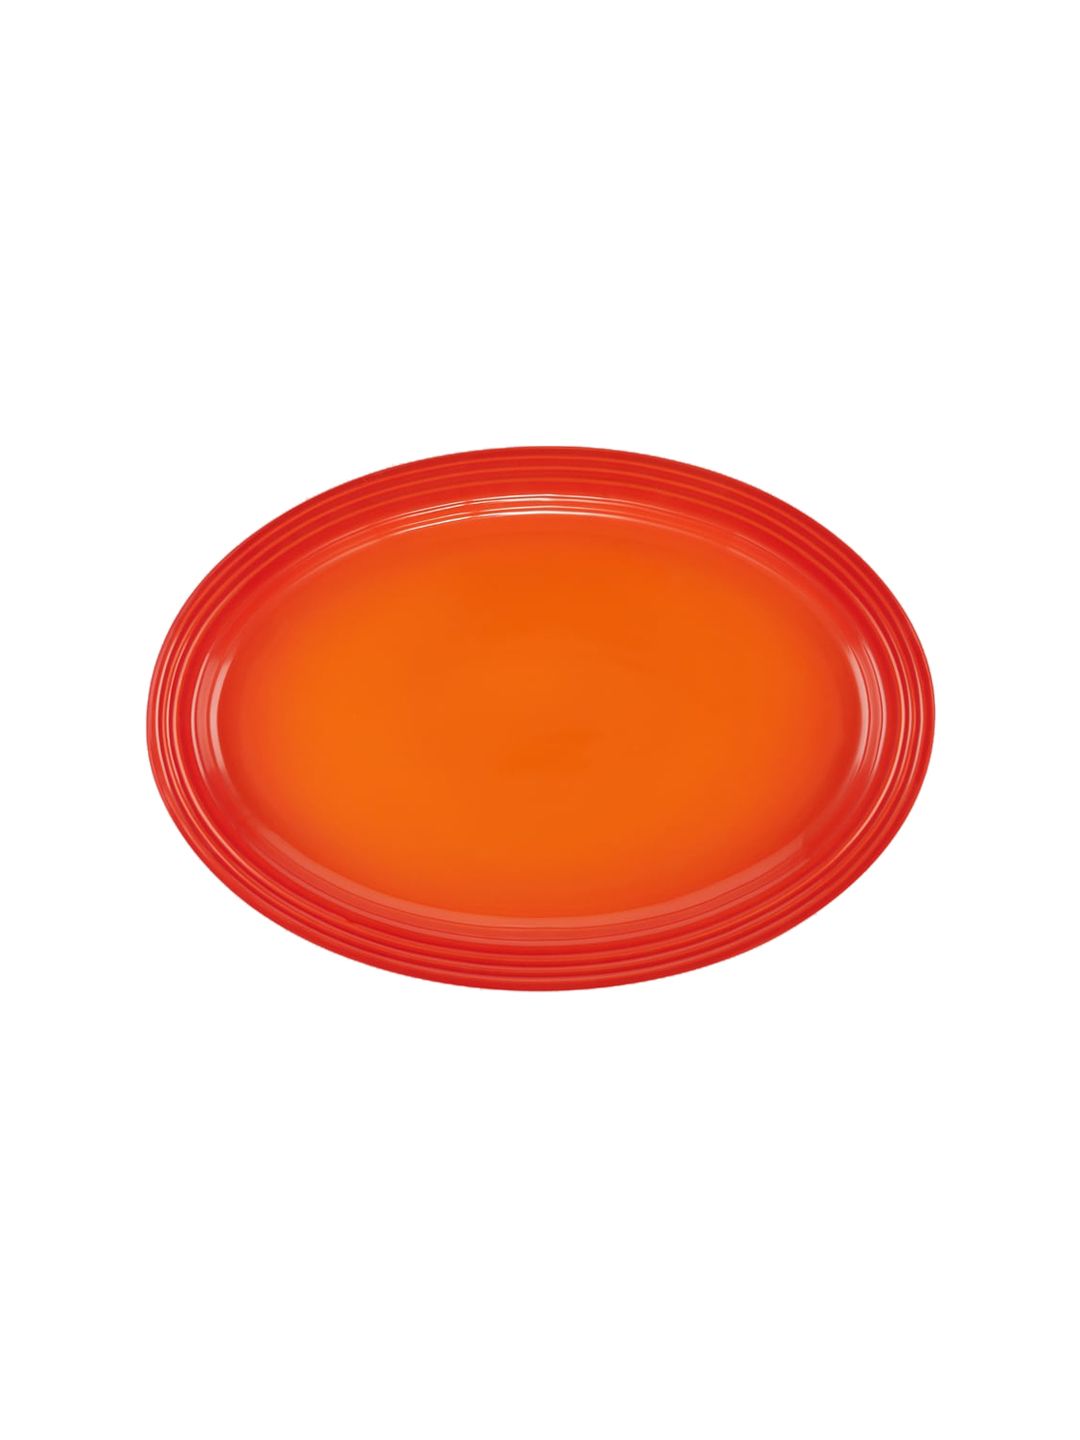 LE CREUSET Orange-Colored Solid Serving Platter Price in India